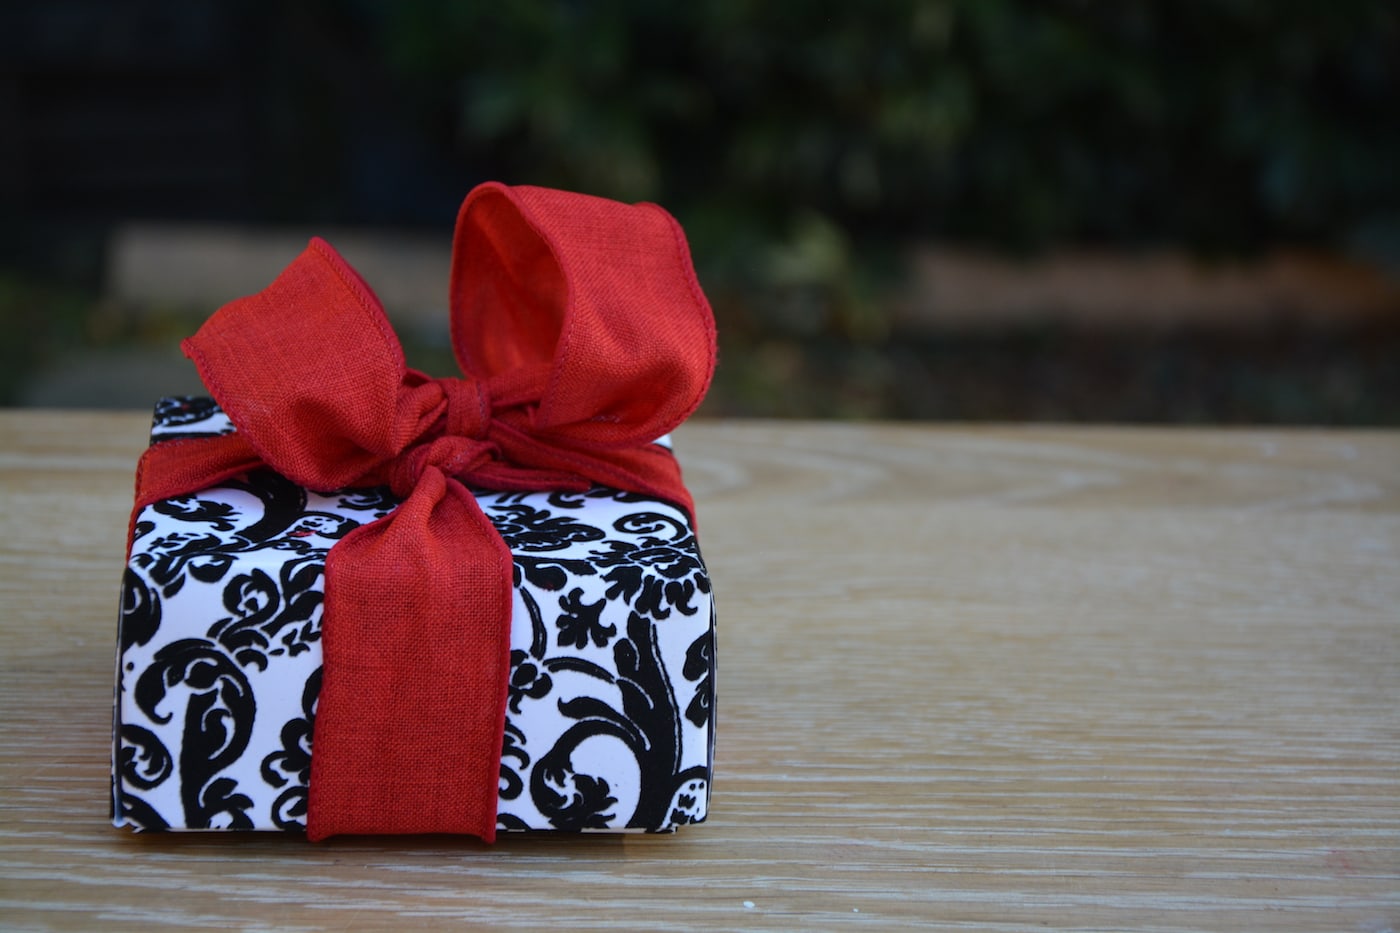 How to Make a Gift Box Out of Scrapbook Paper